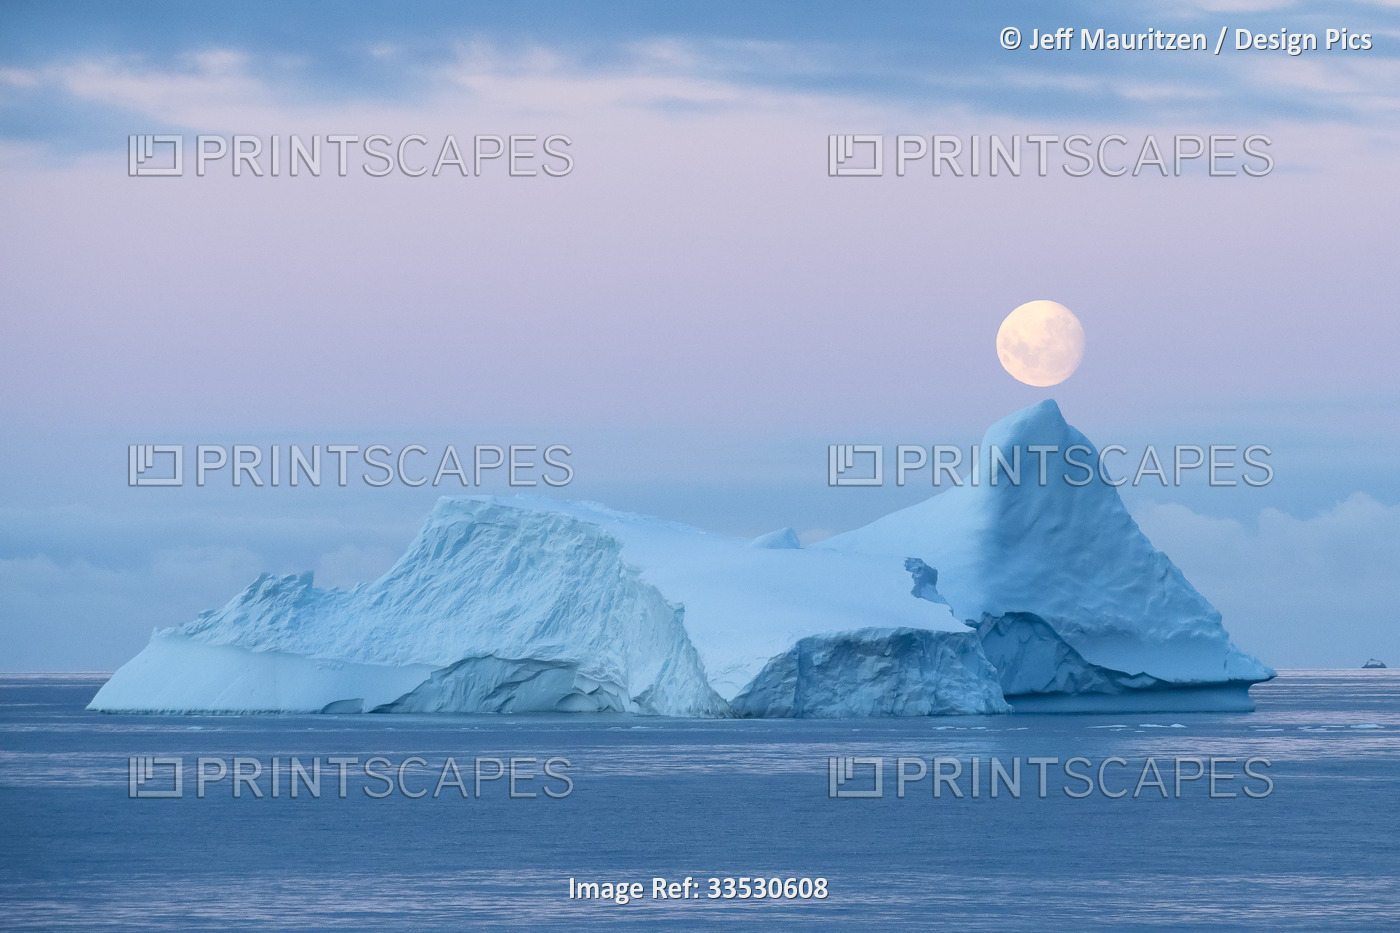 Full moon sets over an iceberg in the Gerlache Strait off the coast of the ...